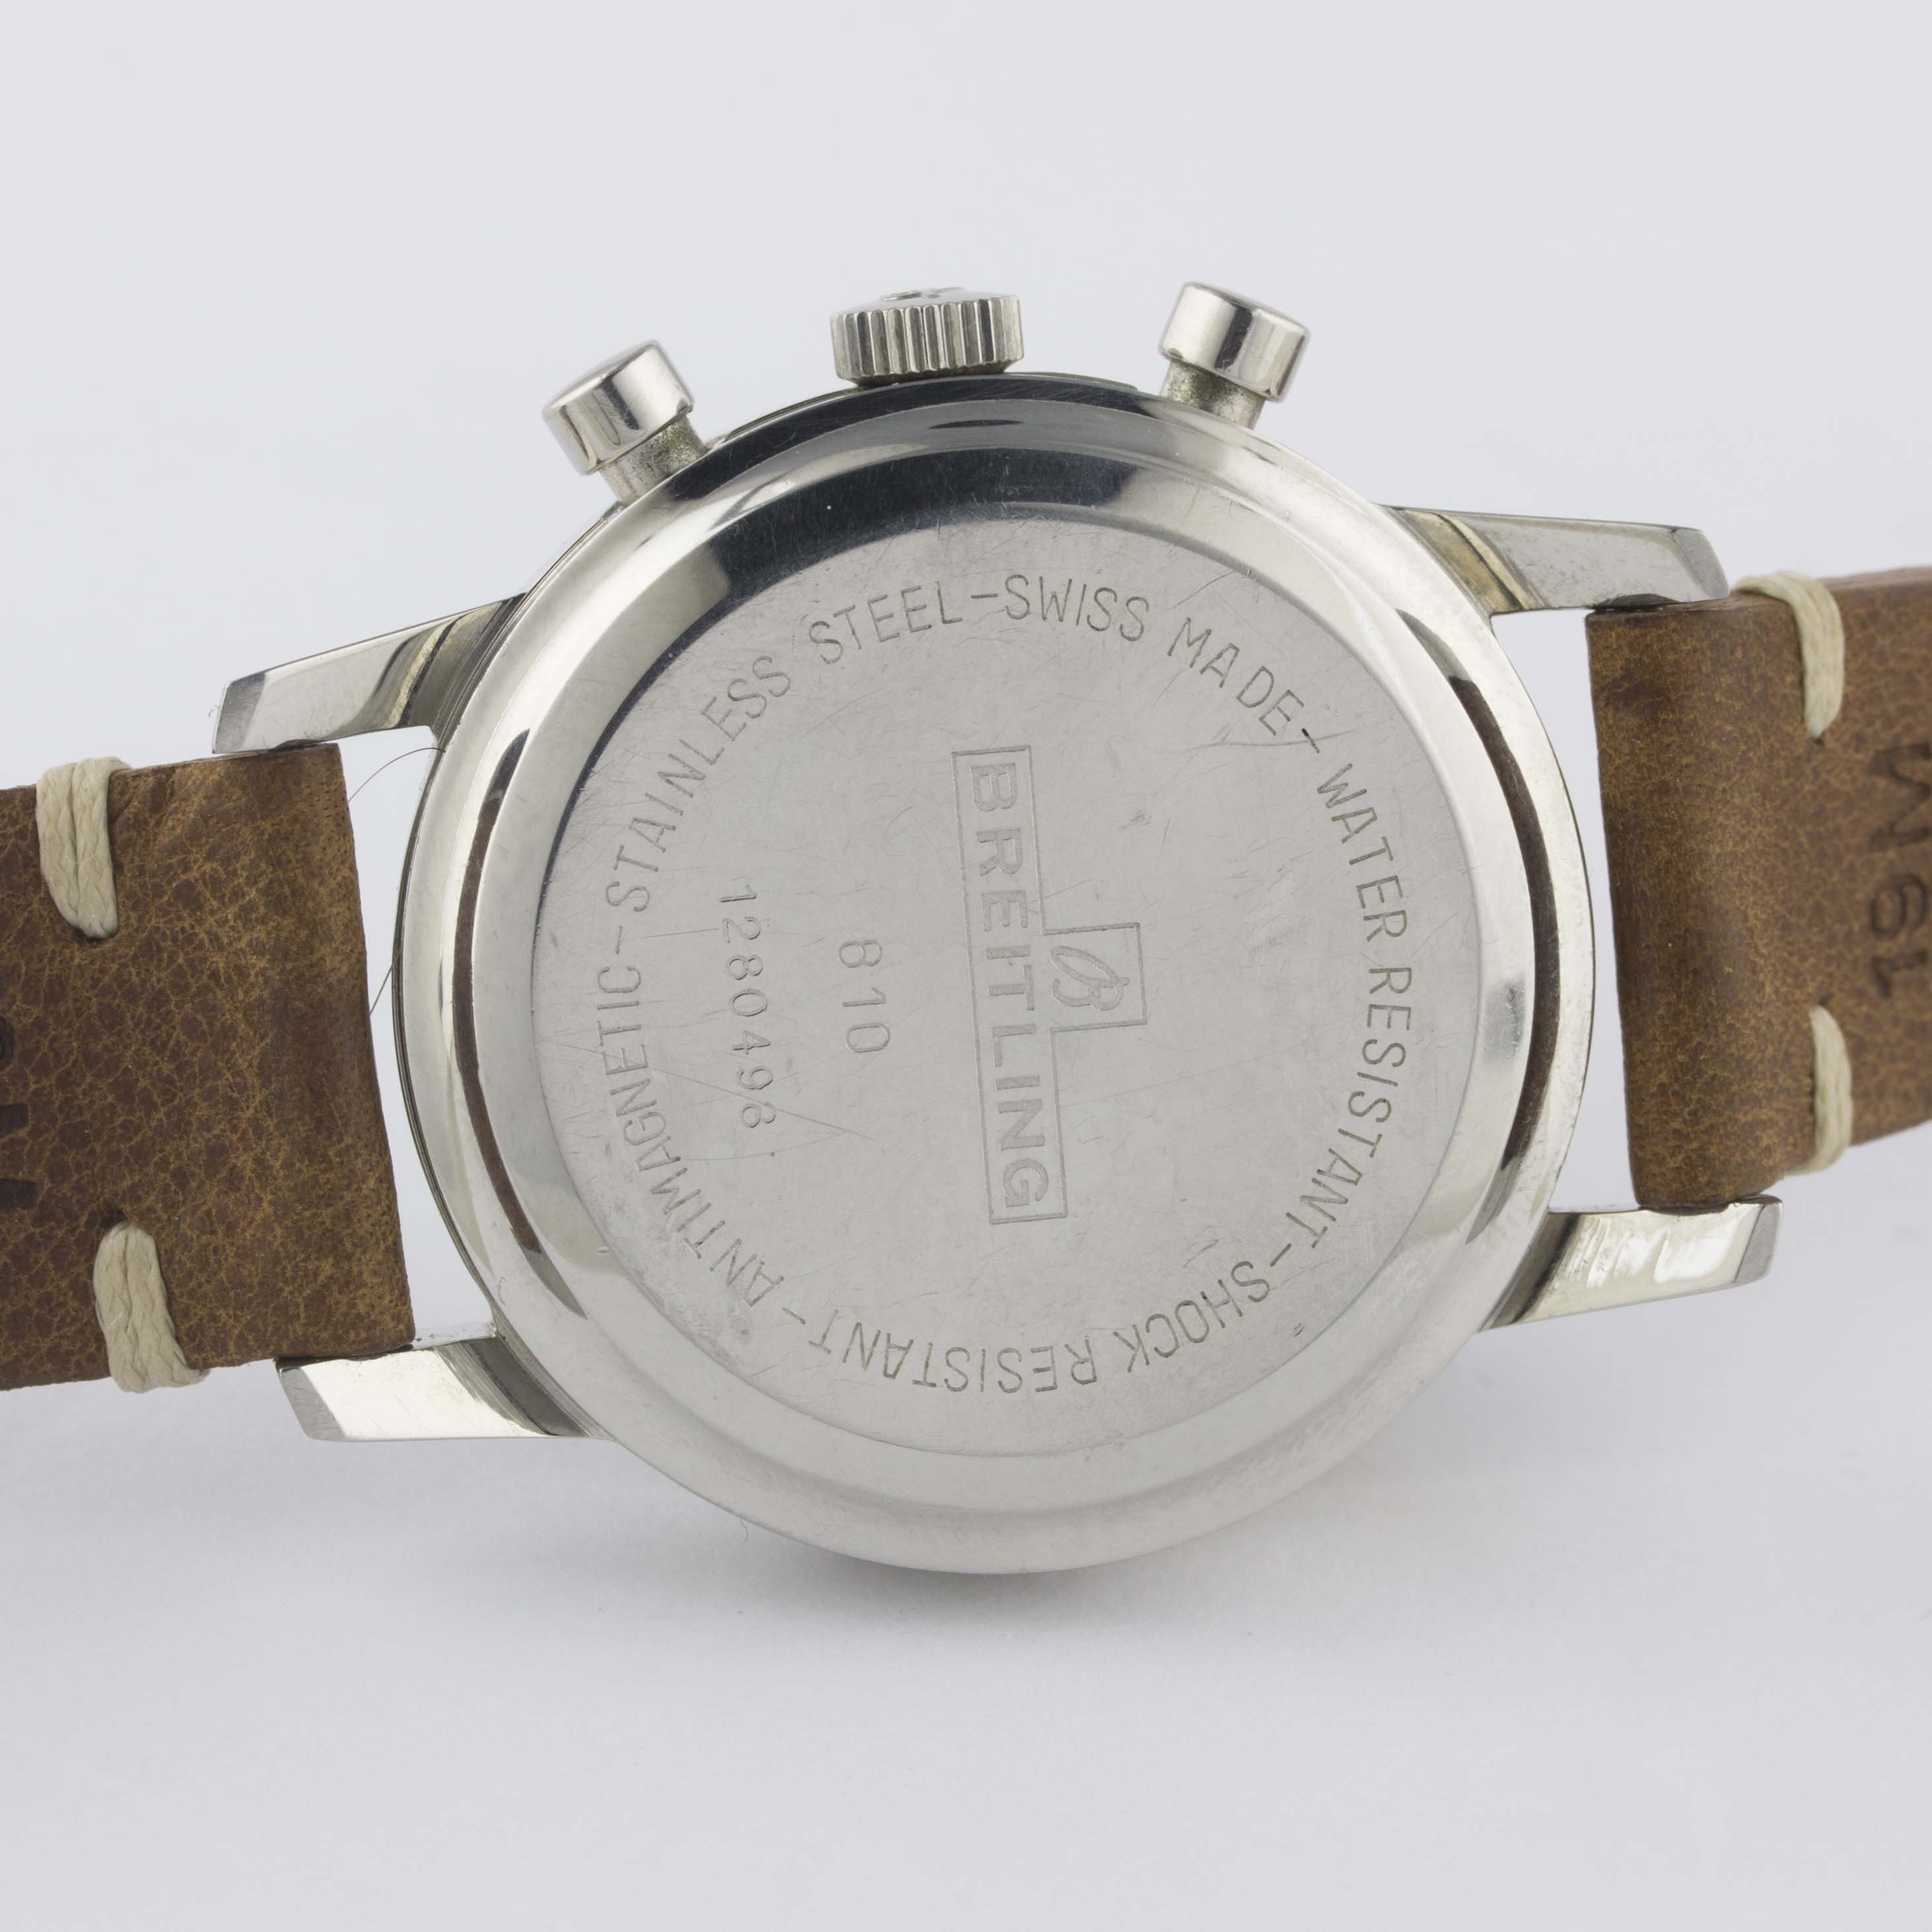 A RARE GENTLEMAN'S STAINLESS STEEL BREITLING TOP TIME CHRONOGRAPH WRIST WATCH CIRCA 1969, REF. 810 - Image 7 of 11